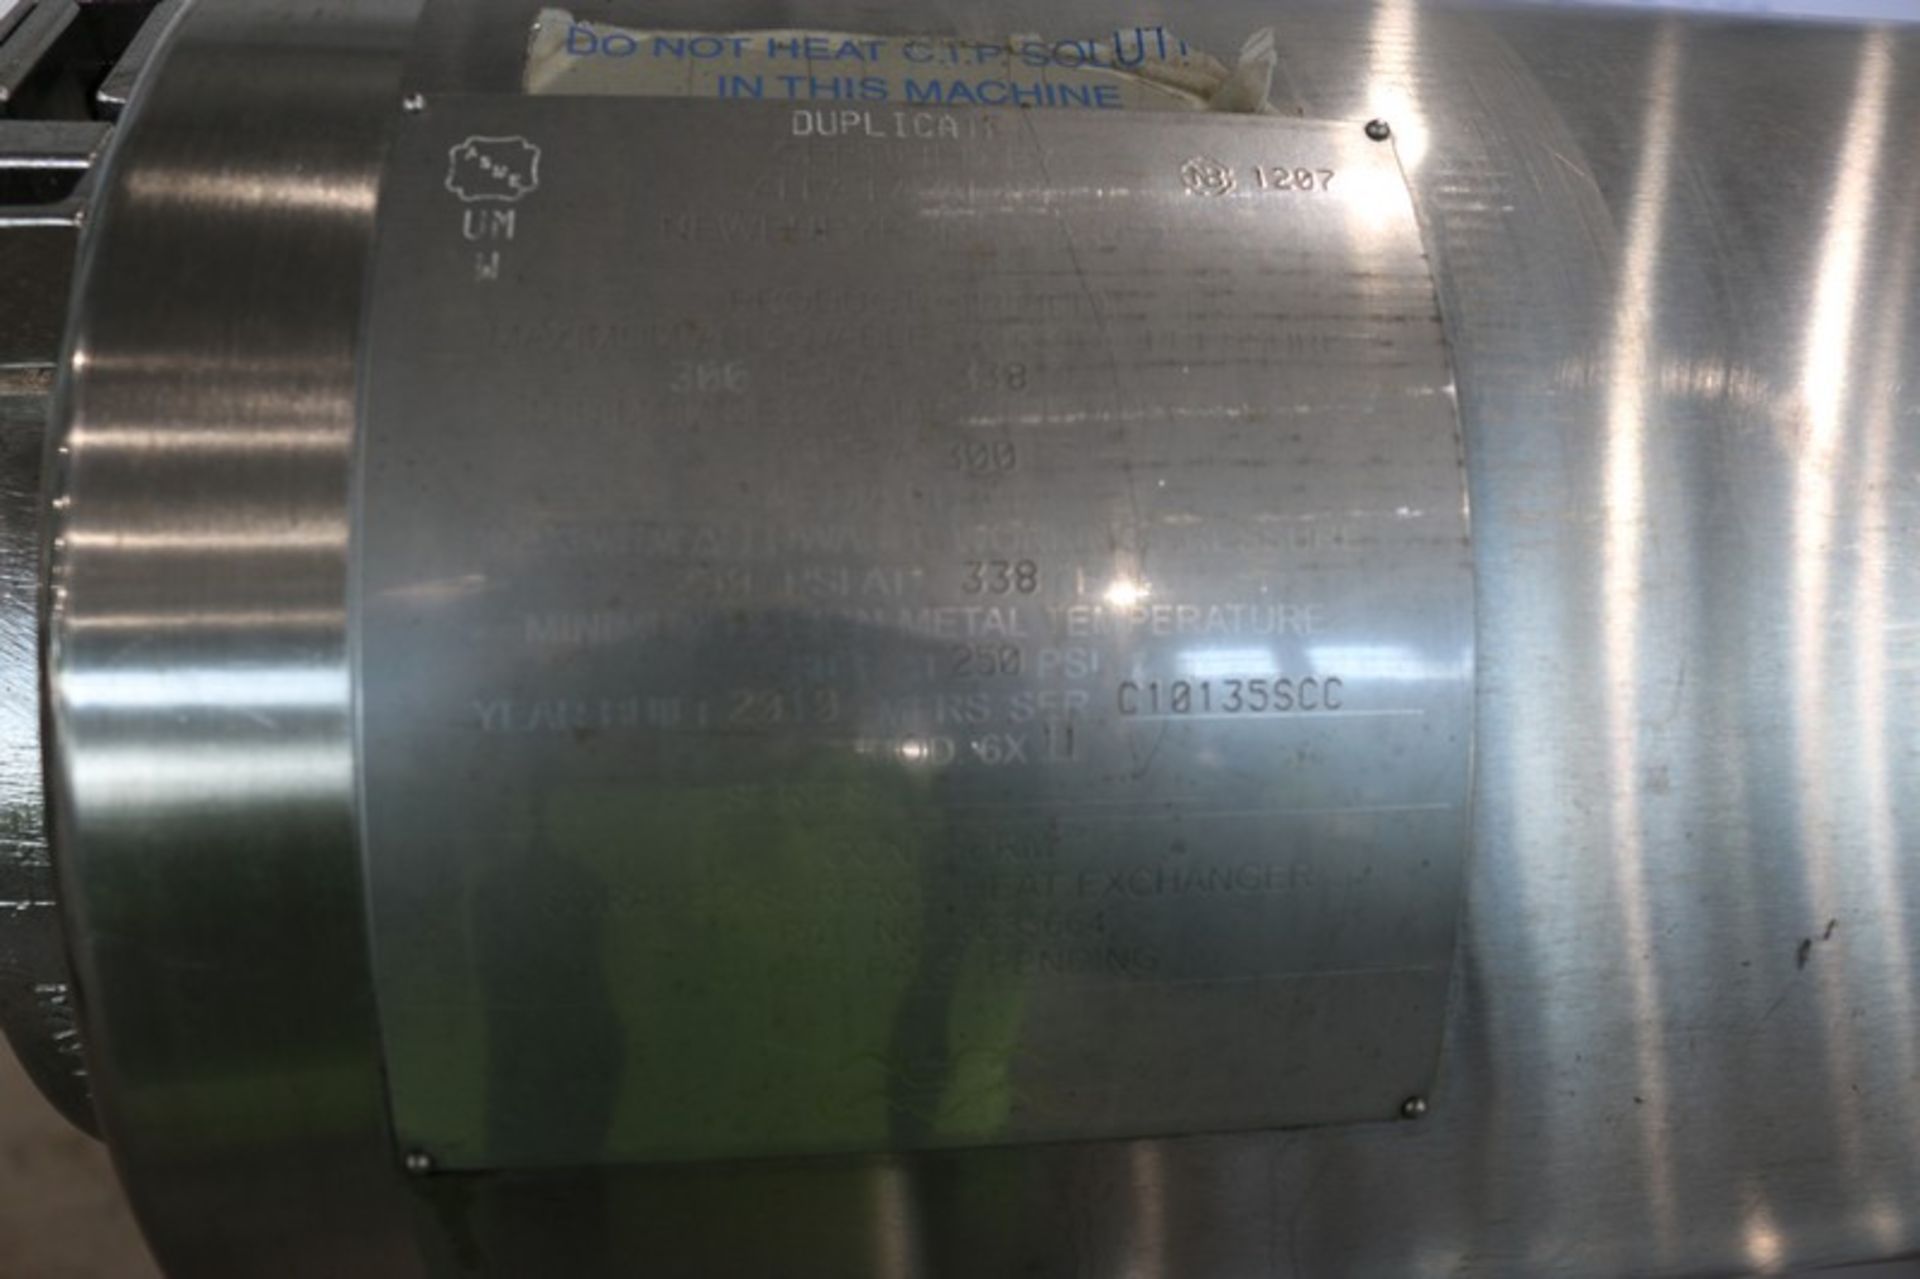 2010 Alfa-Laval Contherm 2-Barrel S/S Scrape Surface Heat Exchanger, M/N 6x11, MAWP 300 PSI @ 338 F, - Image 10 of 12